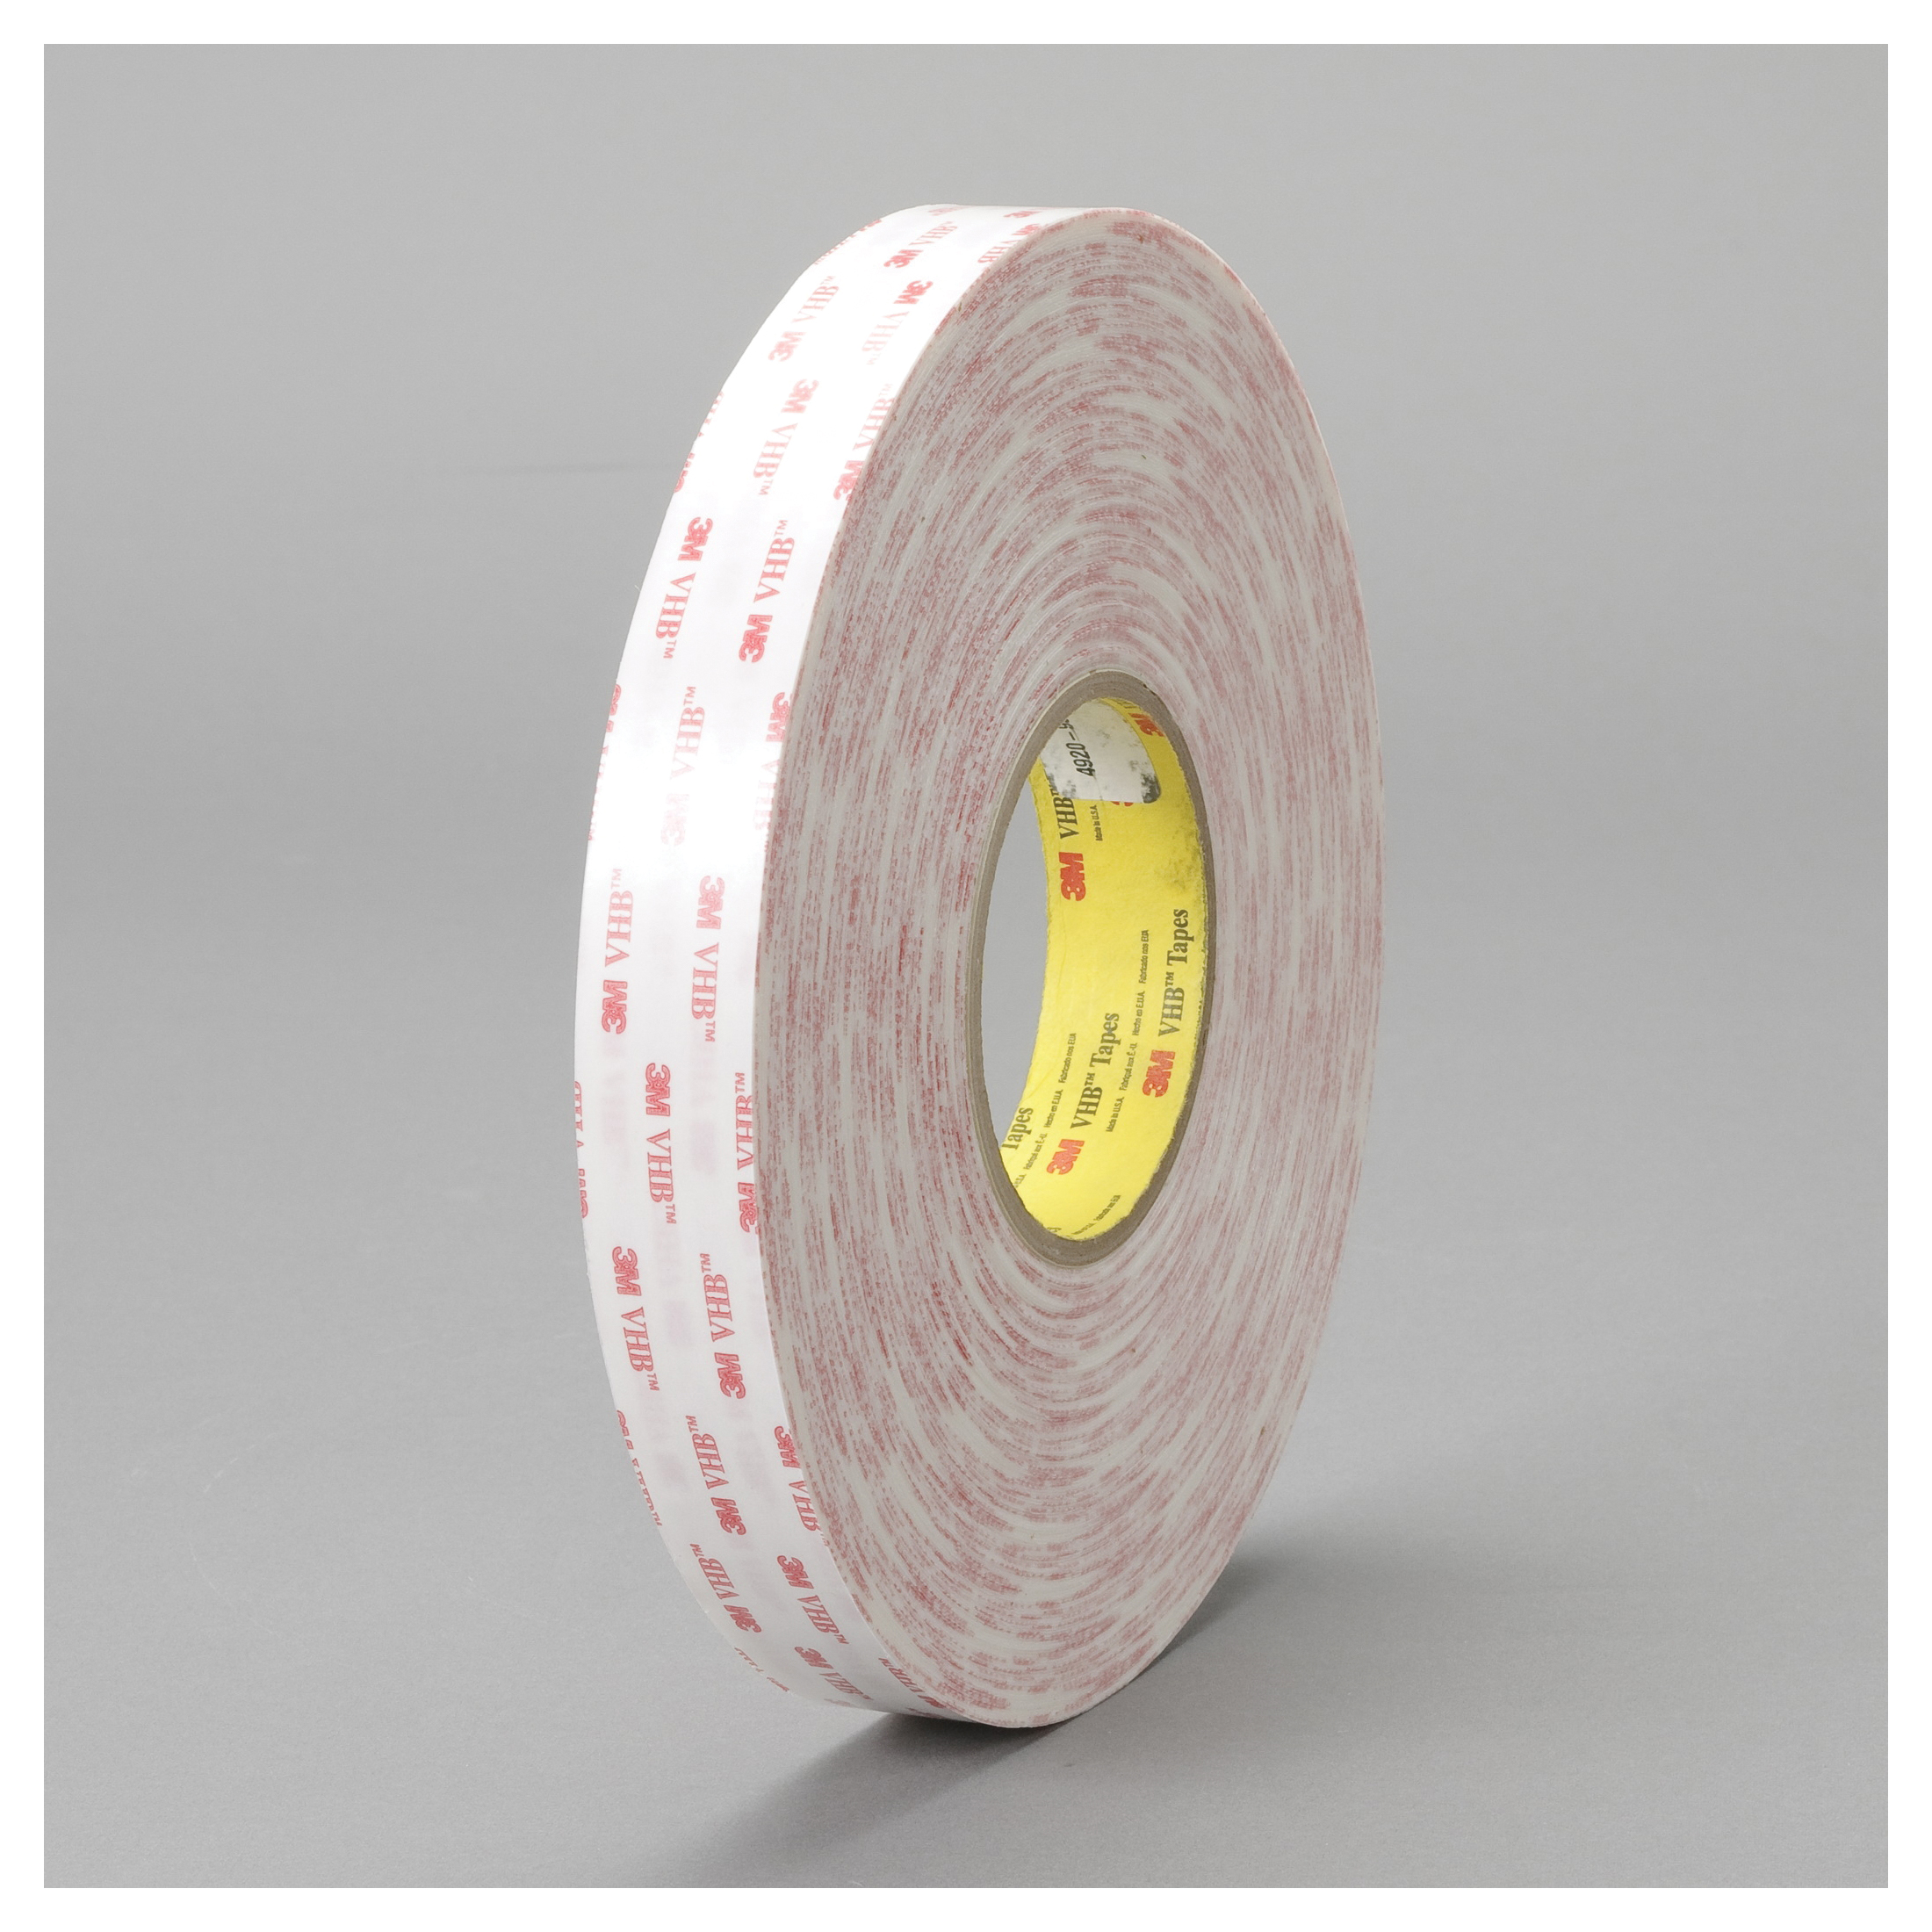 3M™ VHB™ 021200-64594 Pressure Sensitive Double Sided Bonding Tape, 72 yd L x 3/4 in W, 0.015 in THK, General Purpose Acrylic Adhesive, Acrylic Foam Backing, White